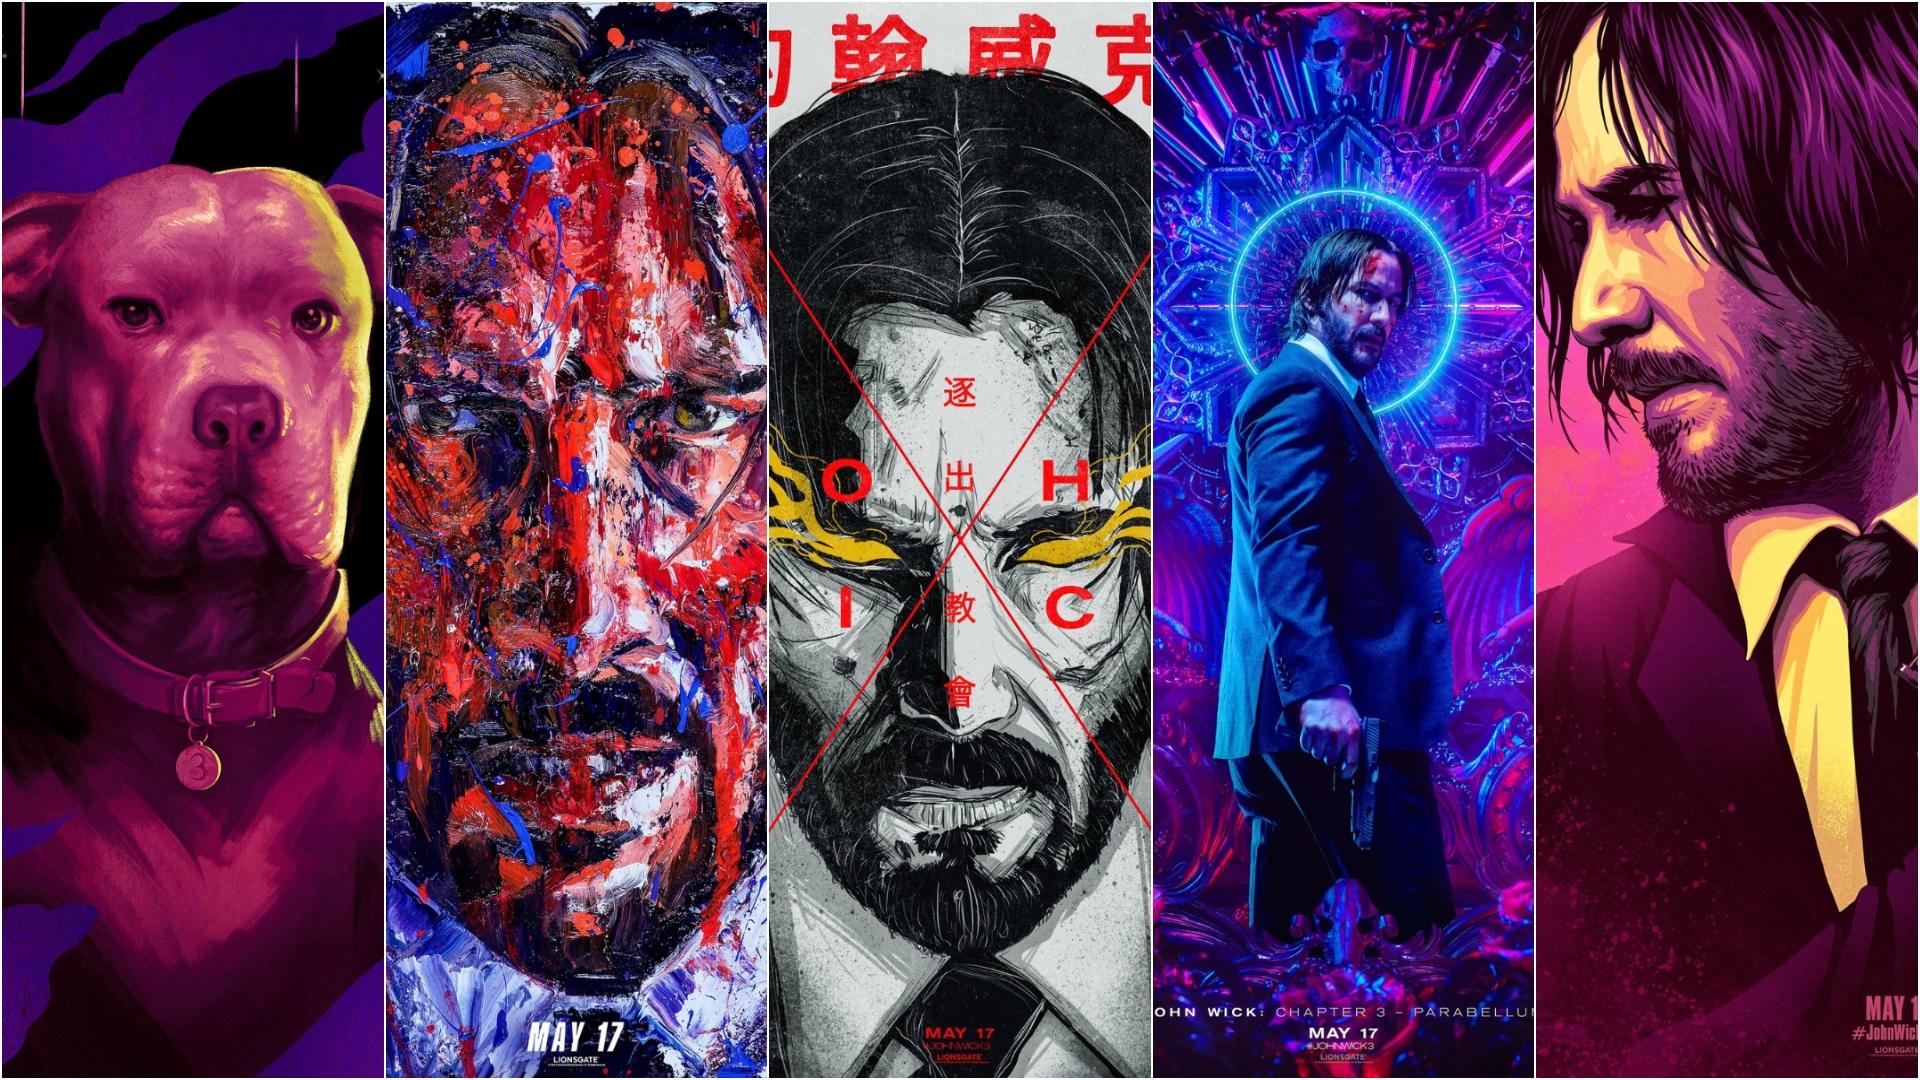 These John Wick 3 Artist Series Posters Are Incredible